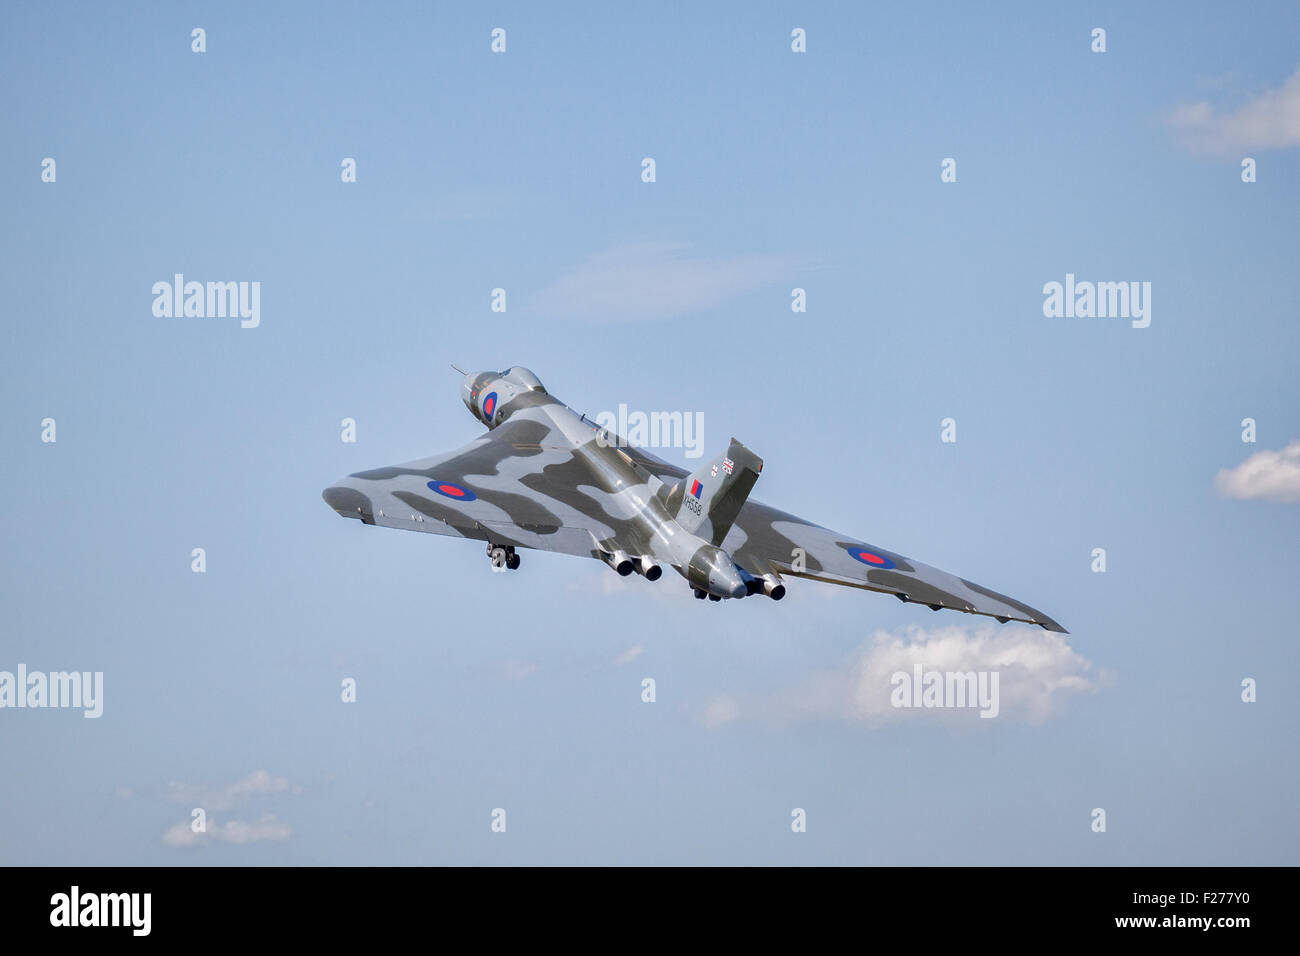 The last flying Avro Vulcan B2 bomber aircraft climbing after takeoff at RIAT 2015, at Fairford, Gloucestershire. Stock Photo